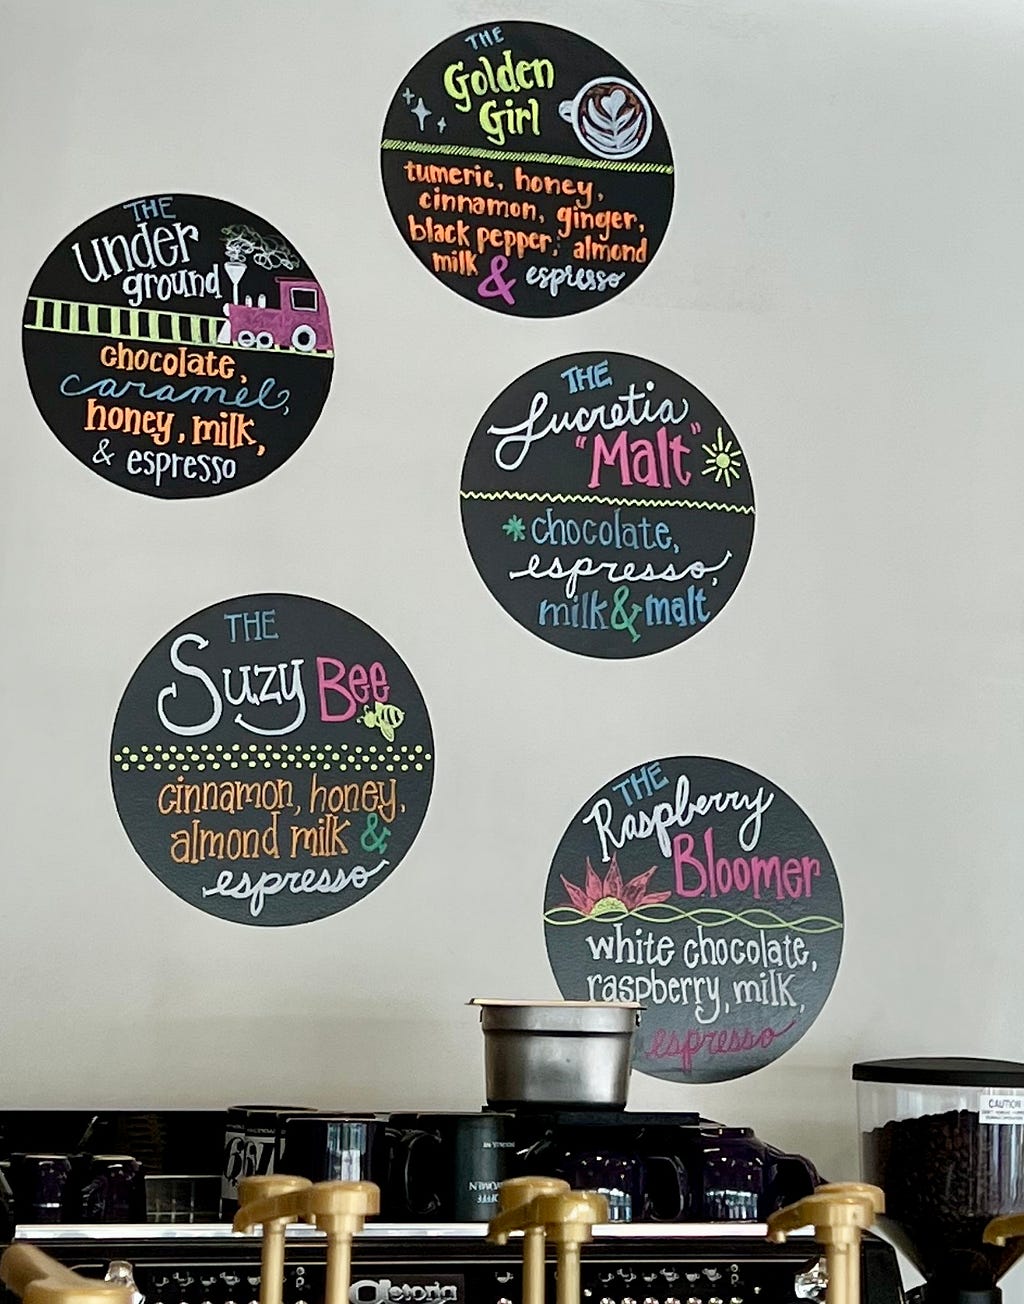 Descriptions of coffee drinks, including THE SUZEY BEE, THE RASPBERRY BLOOMER, and THE LUCRETIA MALT.